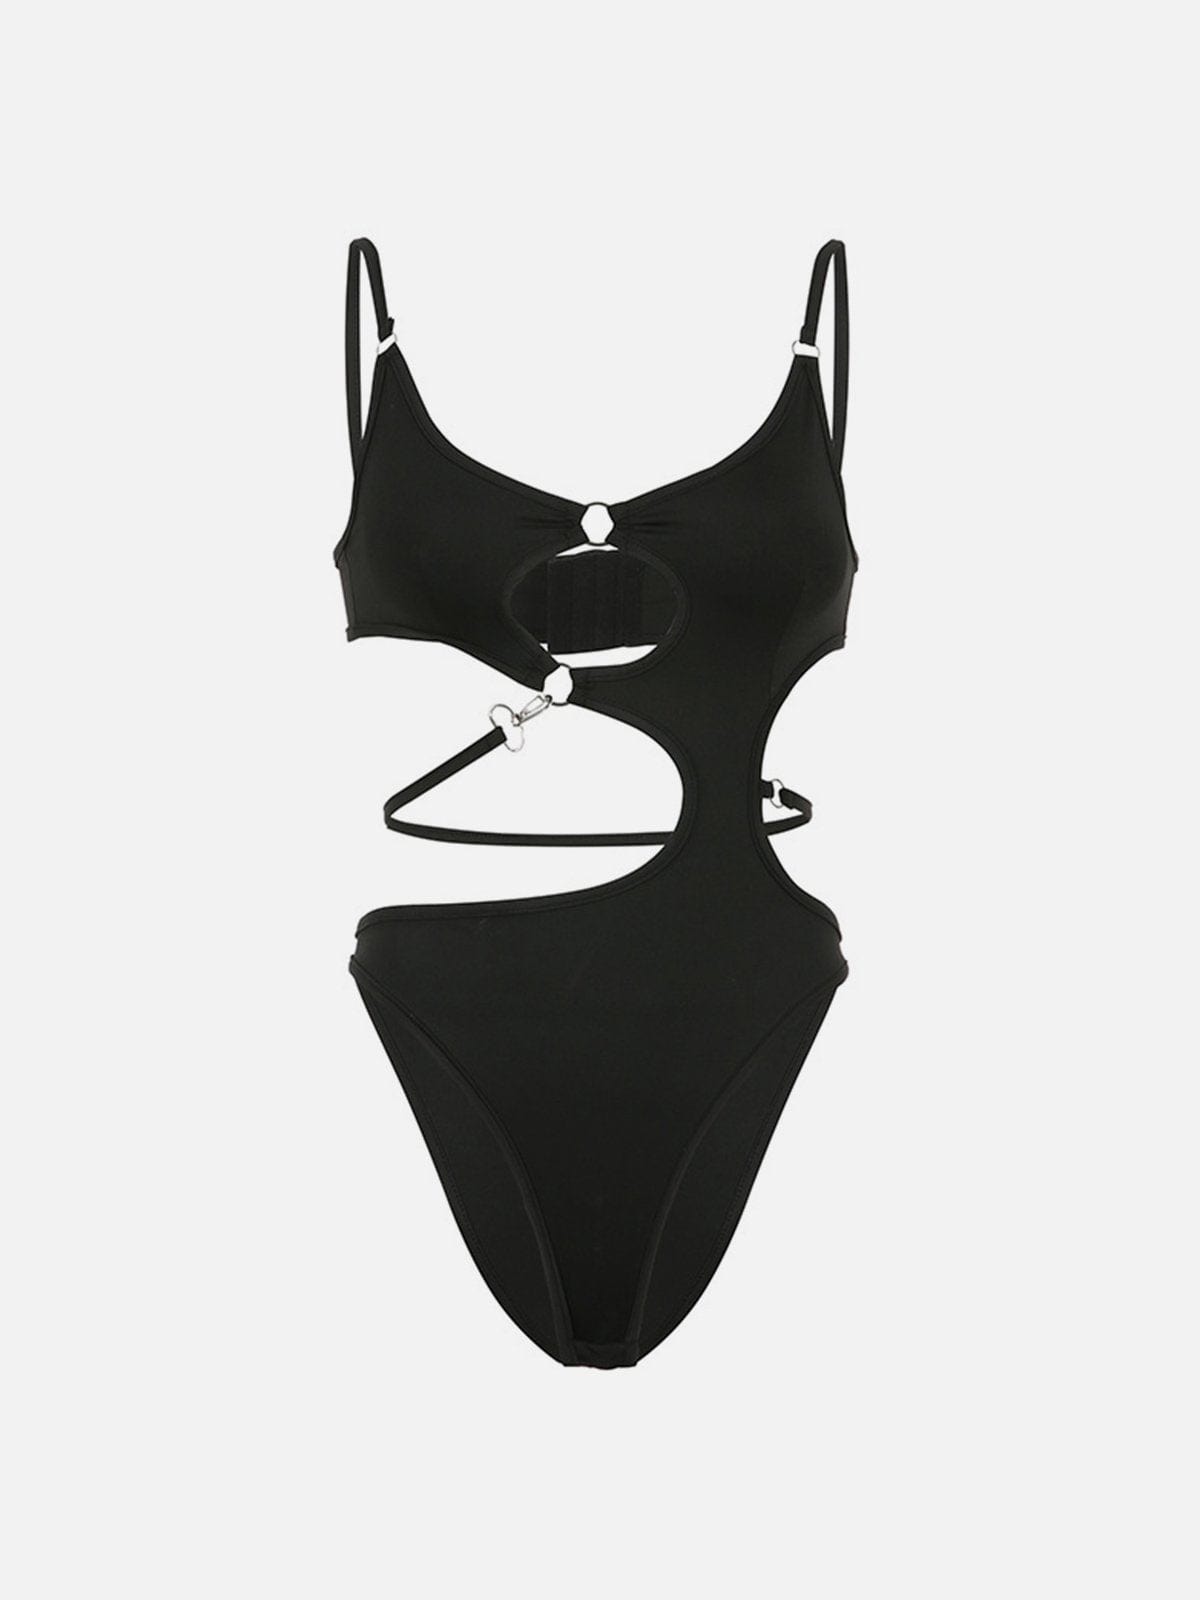 TO Sleeveless Cut Out Bodysuit